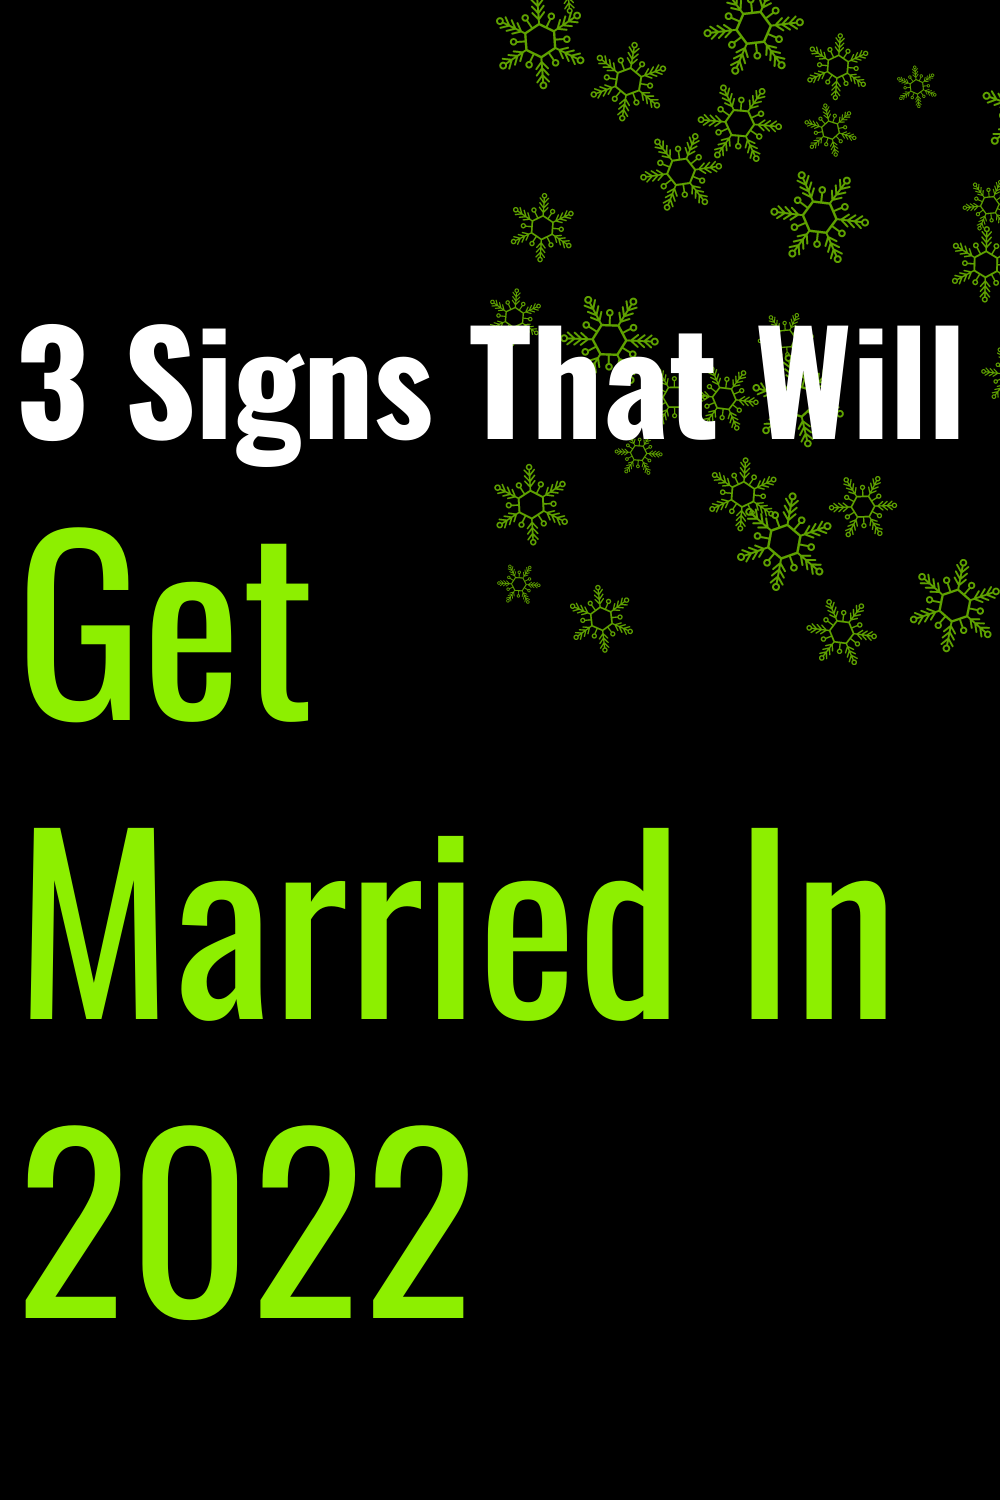 3 Signs That Will Get Married In 2022